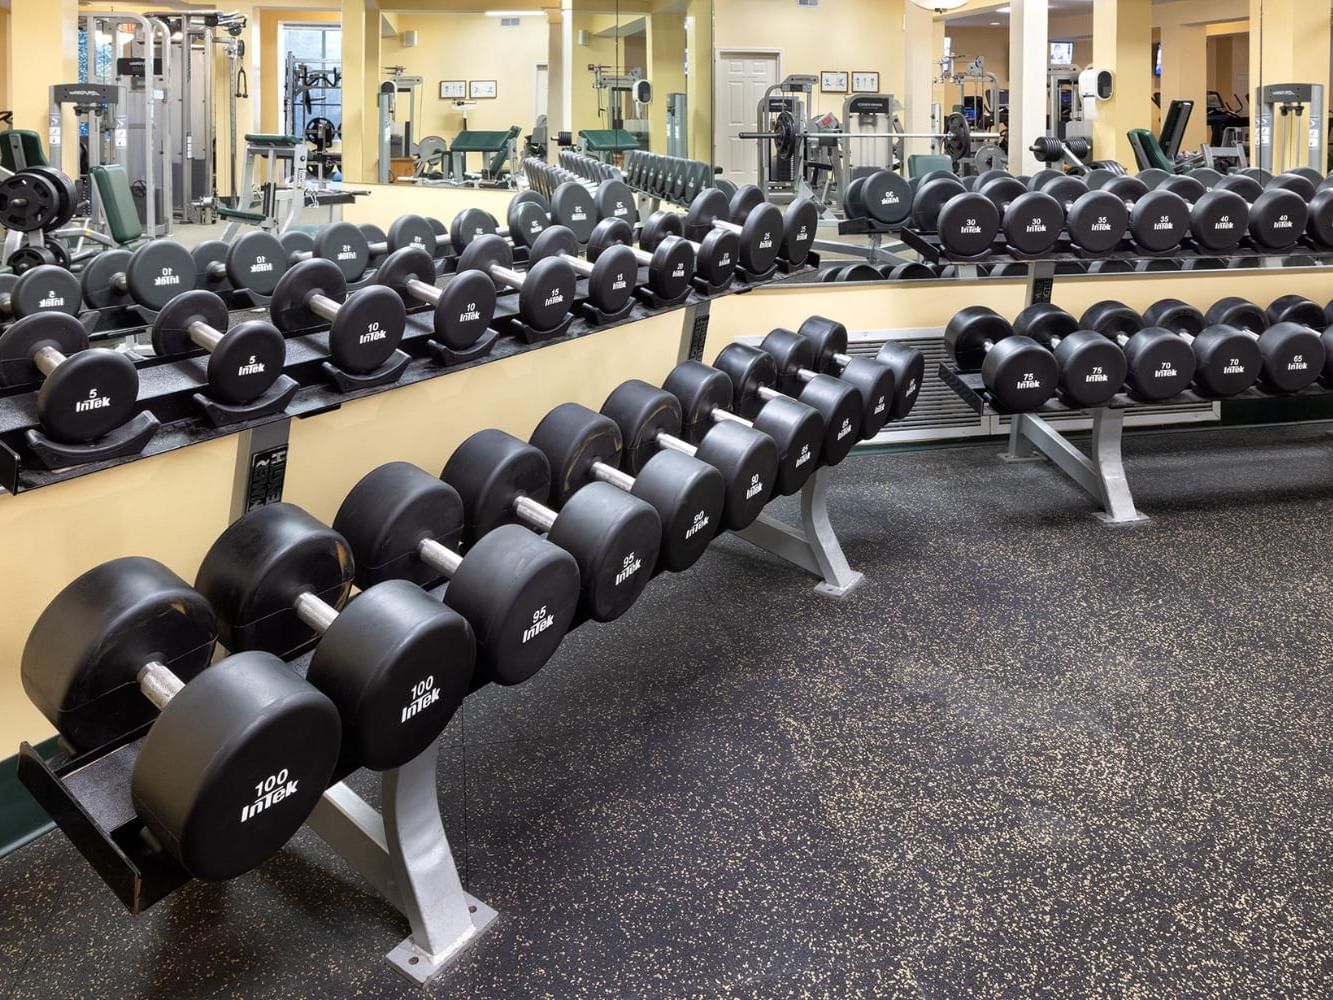 Gym interior with mirrors & dumbbell racks at Meadowmere Resort